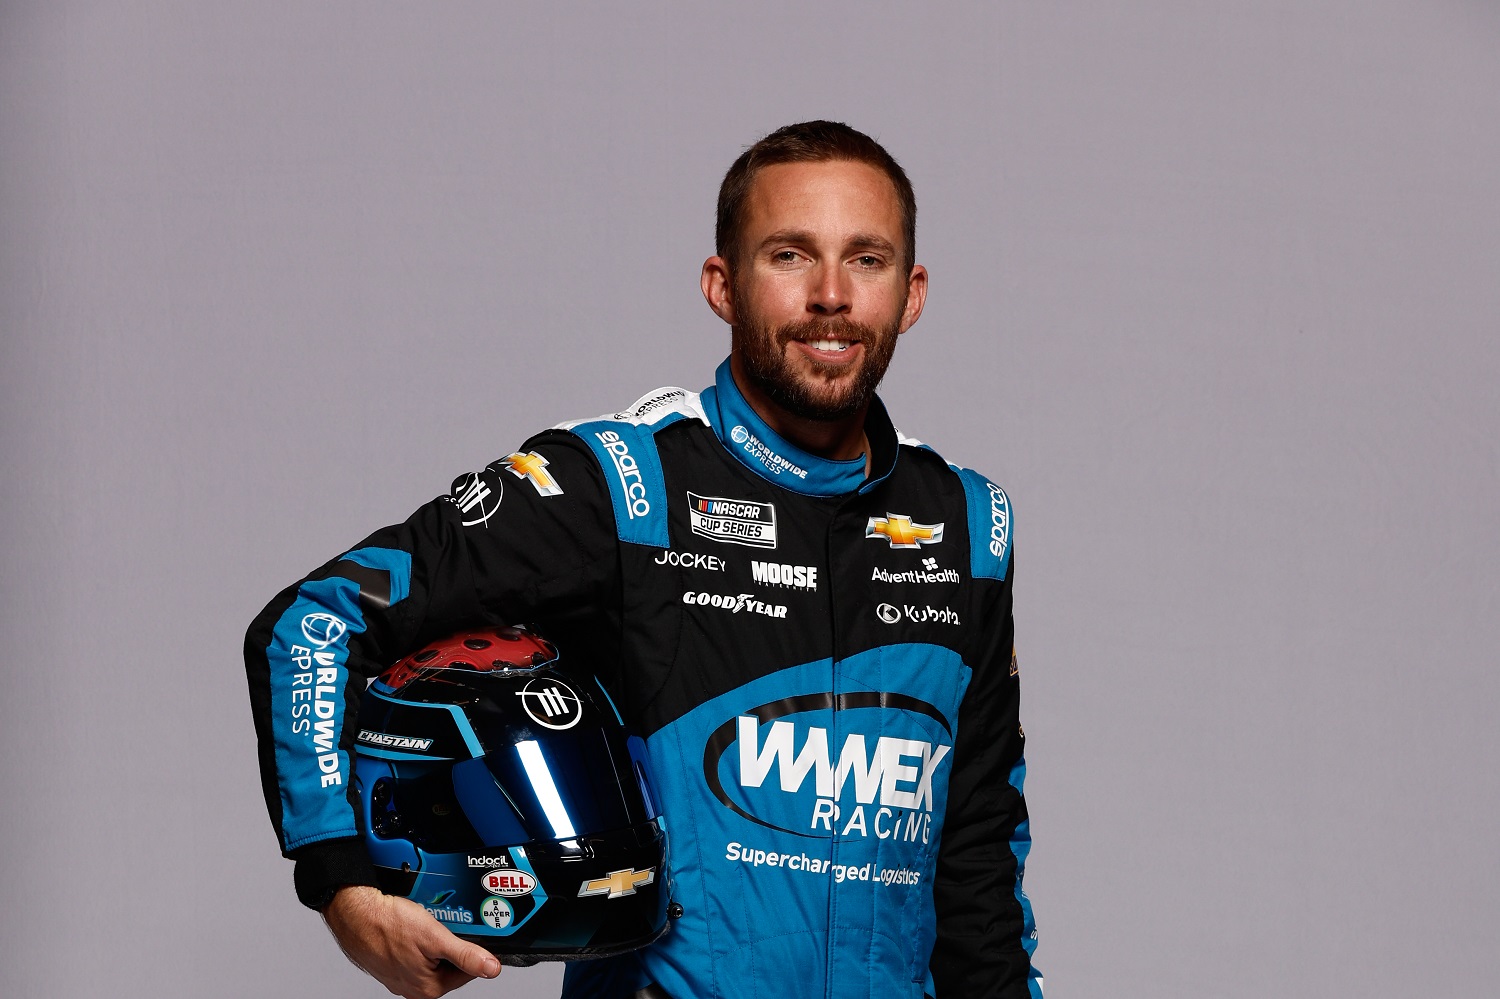 Ross Chastain poses for a photo during NASCAR Production Days at Charlotte Convention Center on Jan. 18, 2023. | Chris Graythen/Getty Images